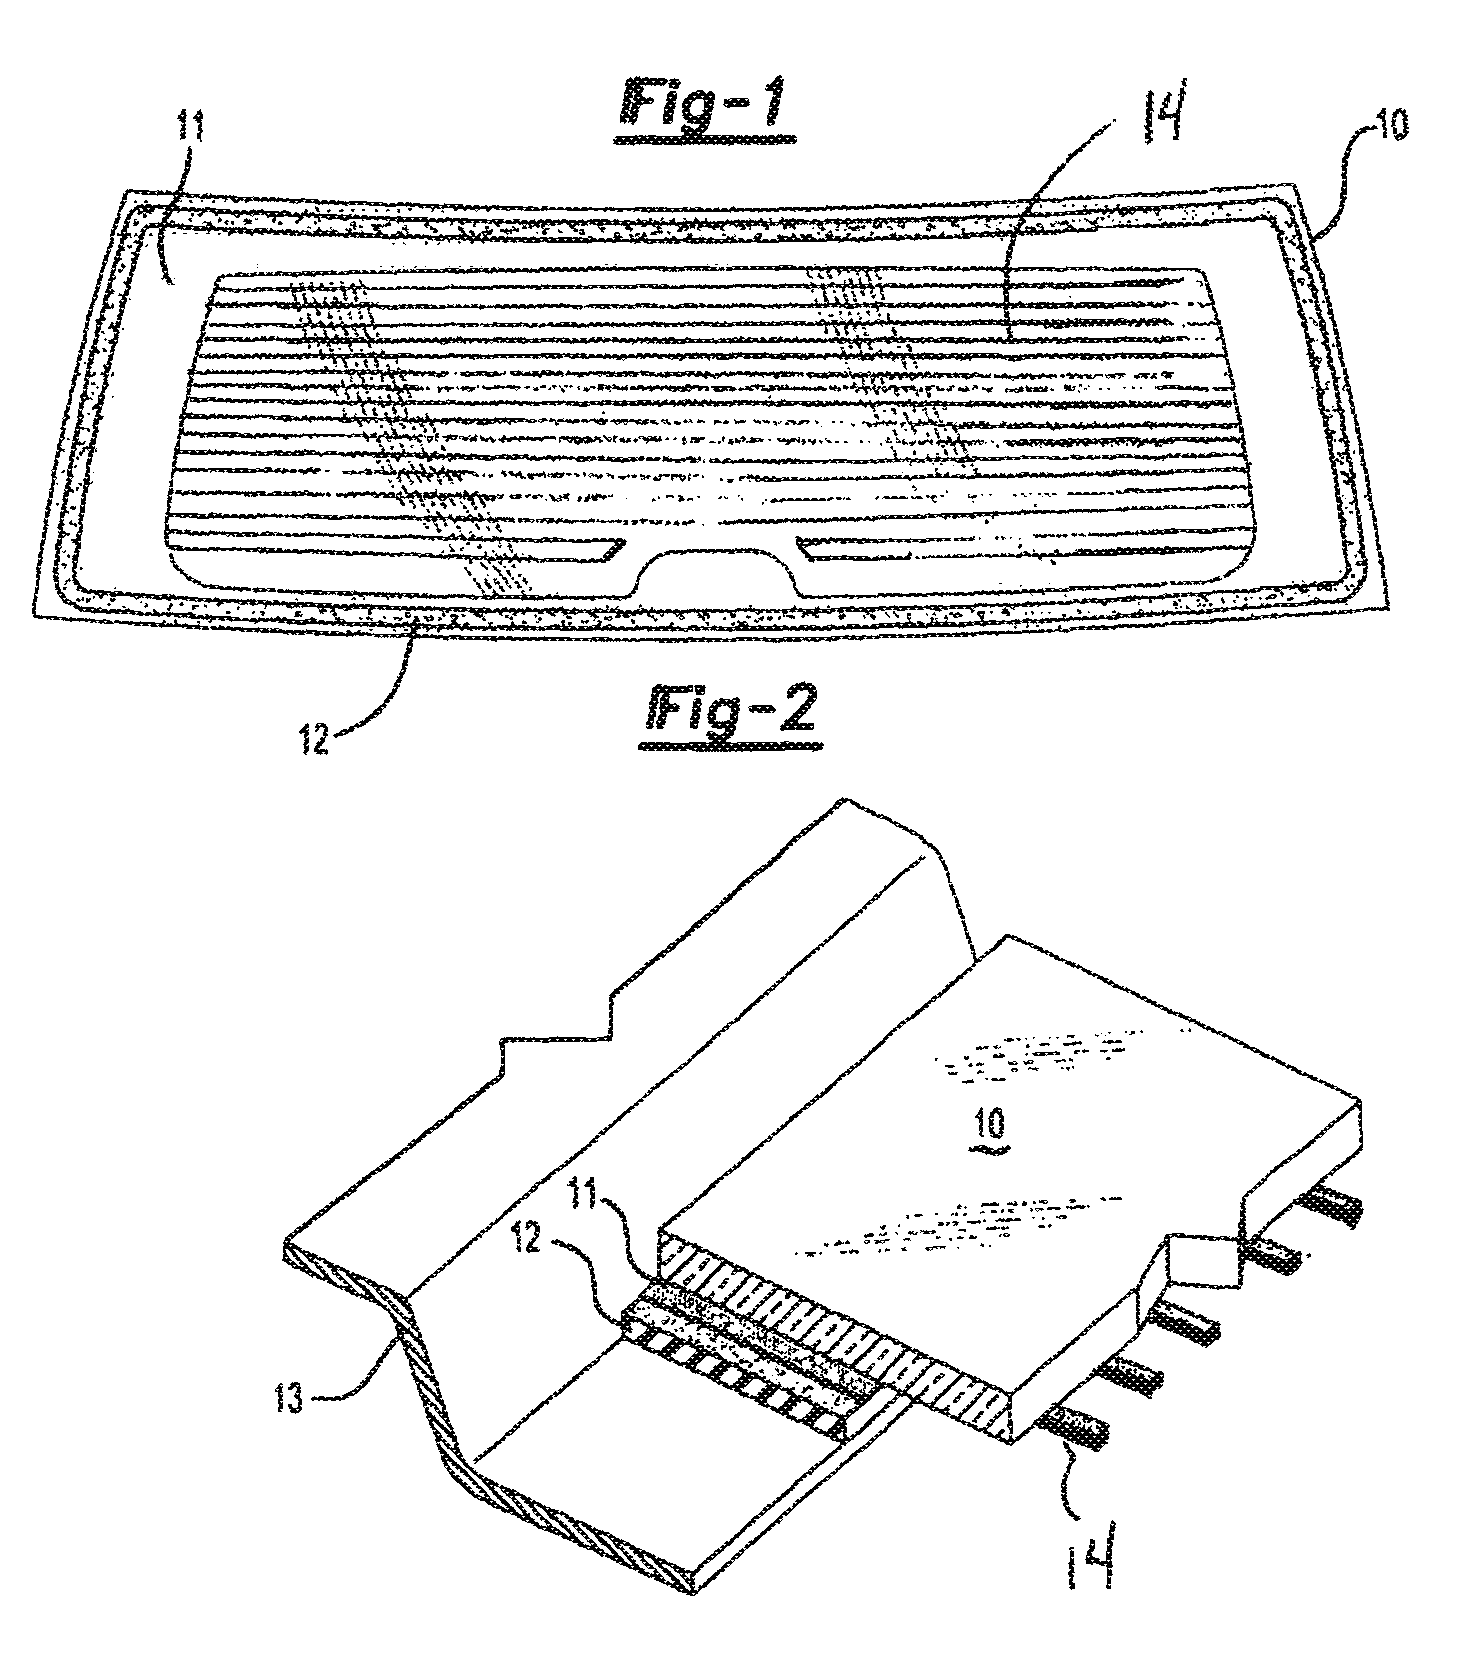 Composites and methods for conductive transparent substrates